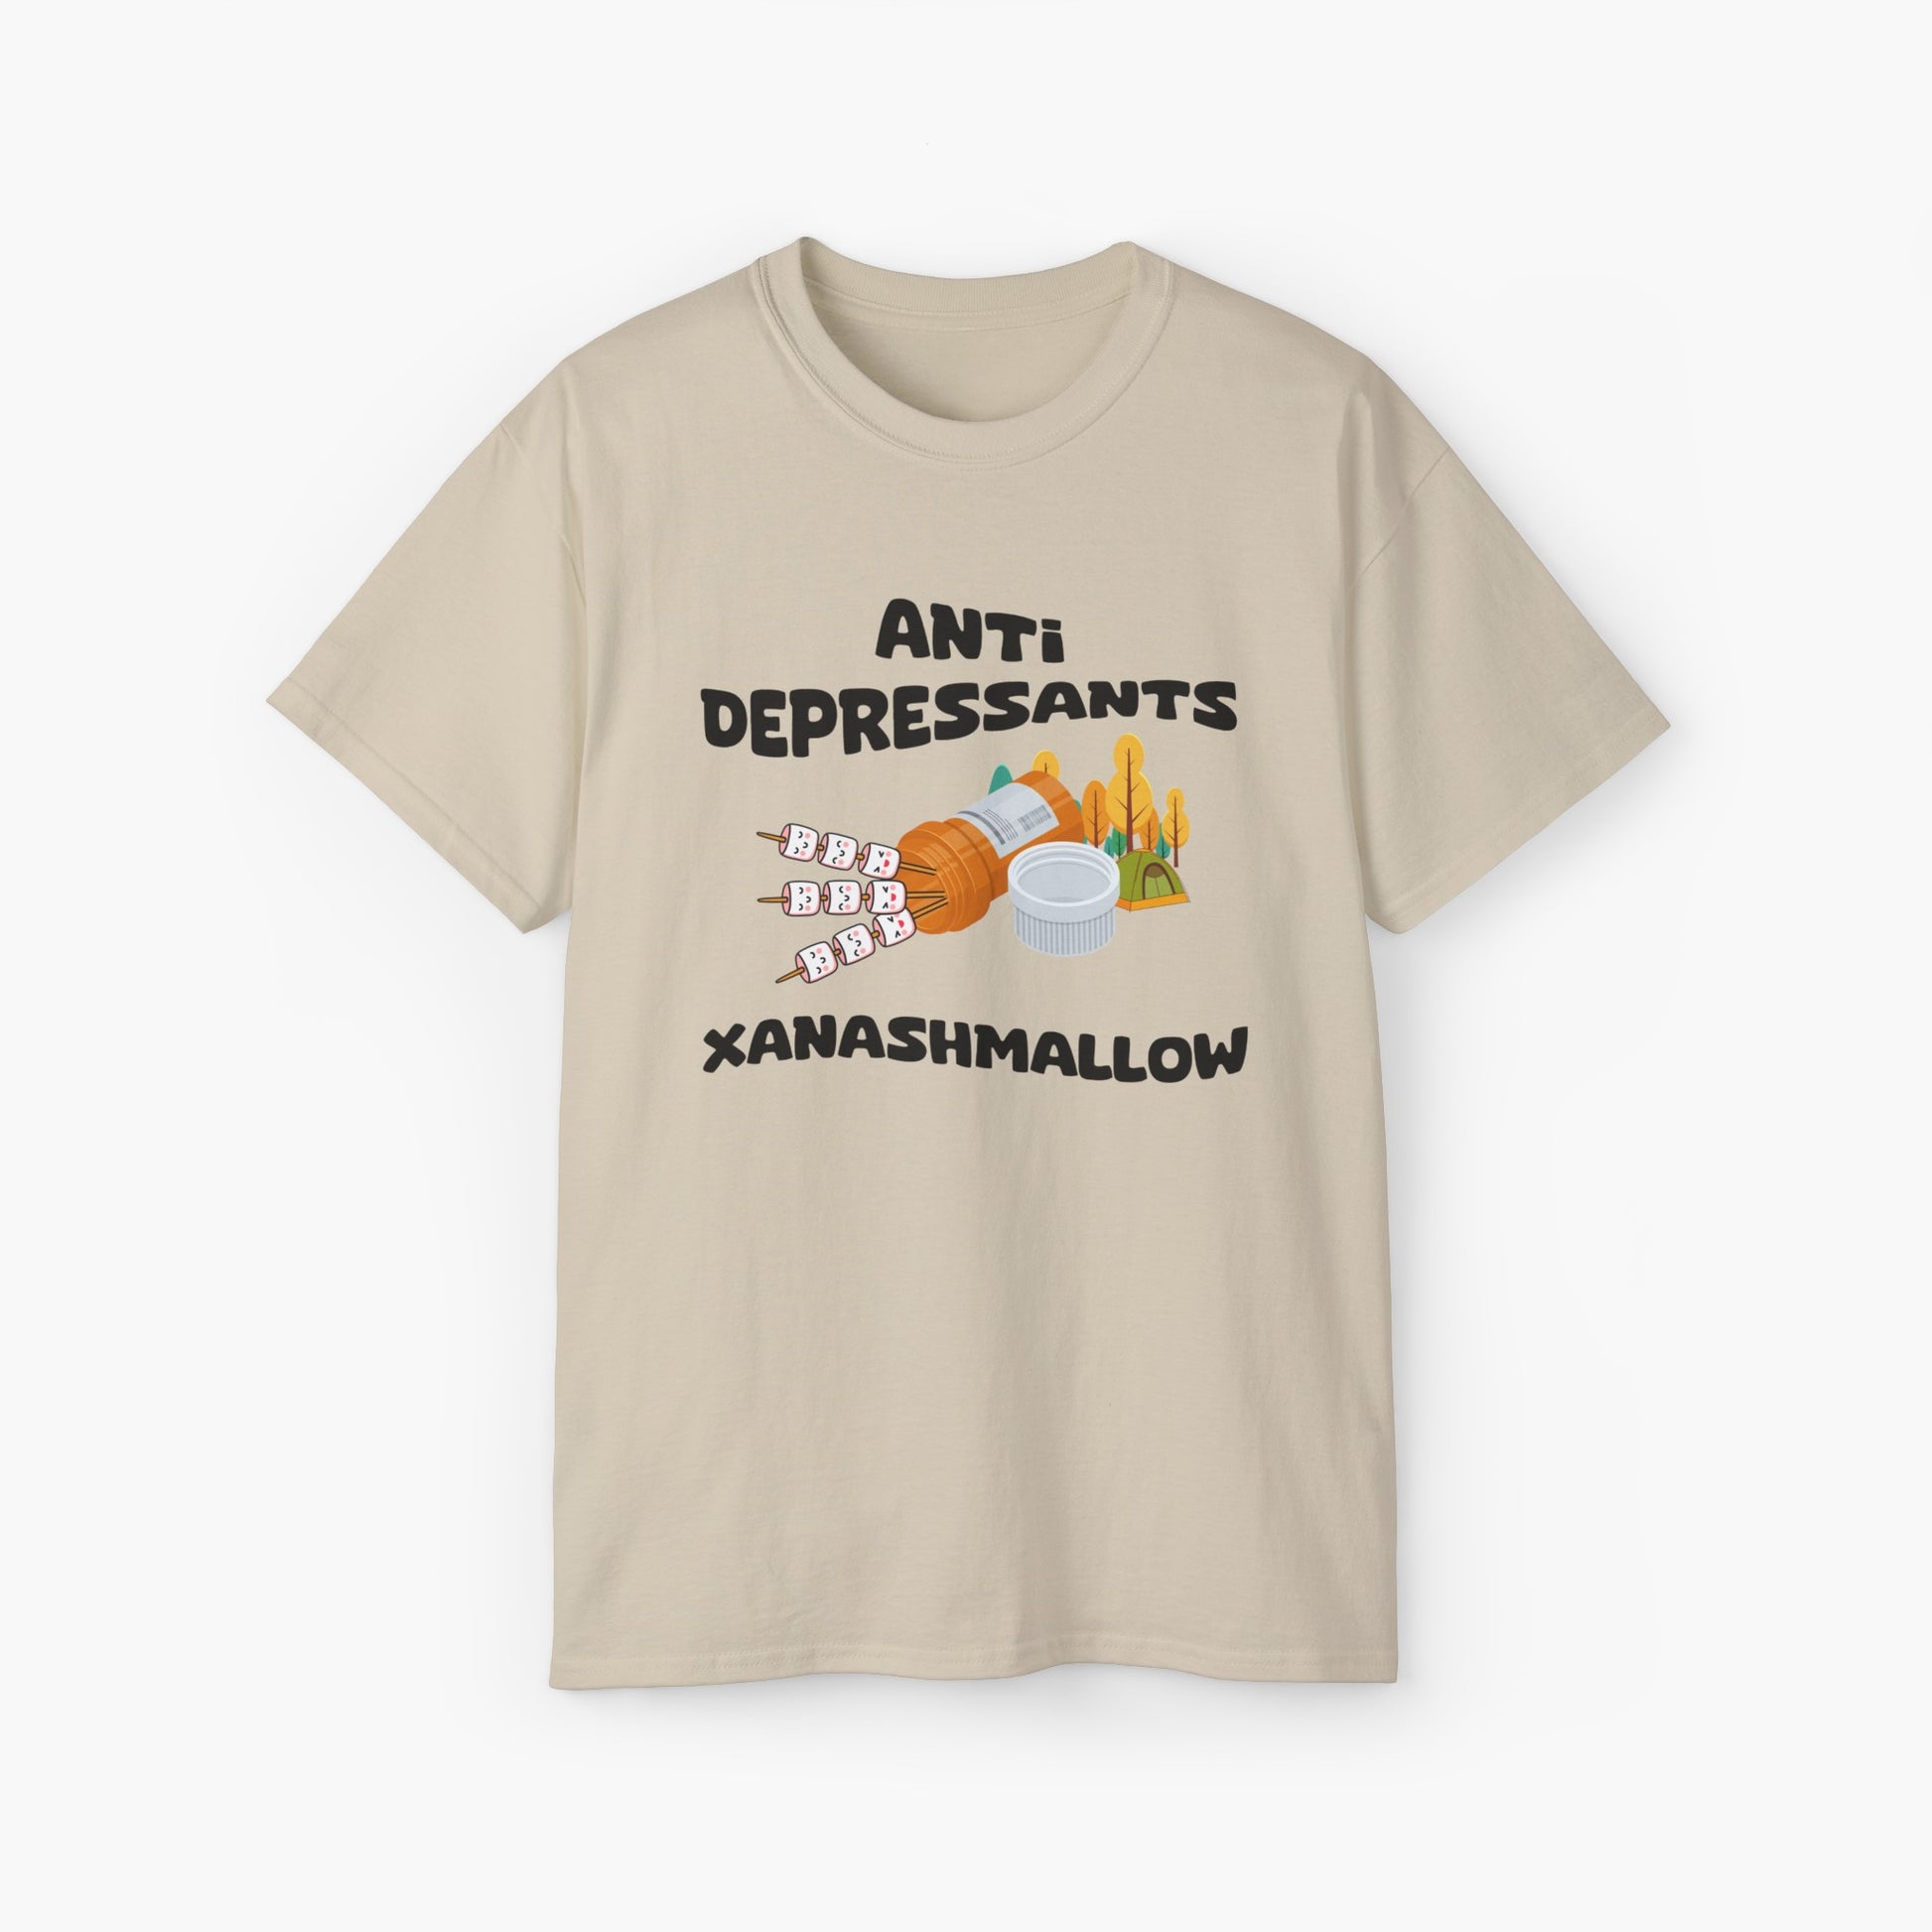 Sand color t-shirt with 'Anti Depressants, Xanashmallow' text, depicting an open remedies box filled with marshmallows, alongside a tent and trees.